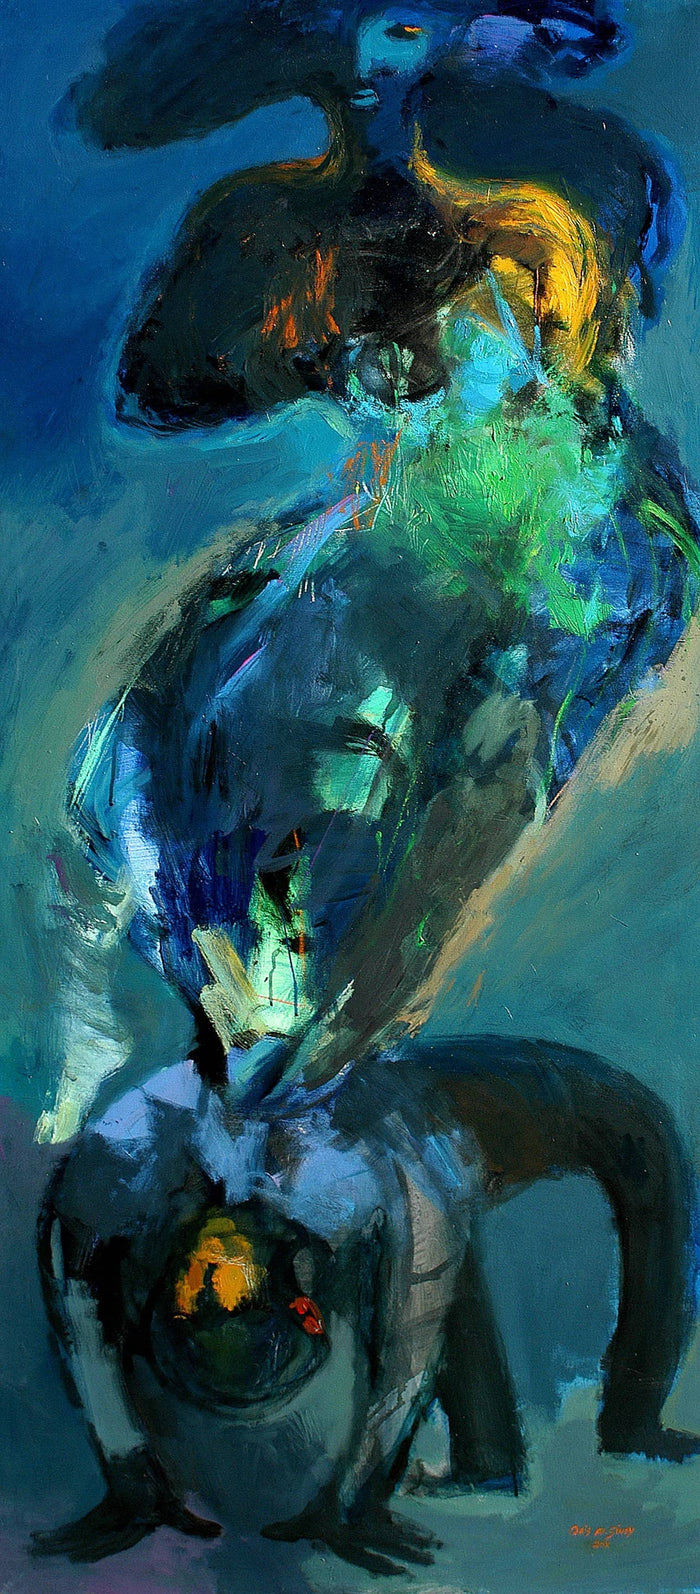 Lovers, Bold Figurative Abstract Art filled with Love, Passion and deep blue colors